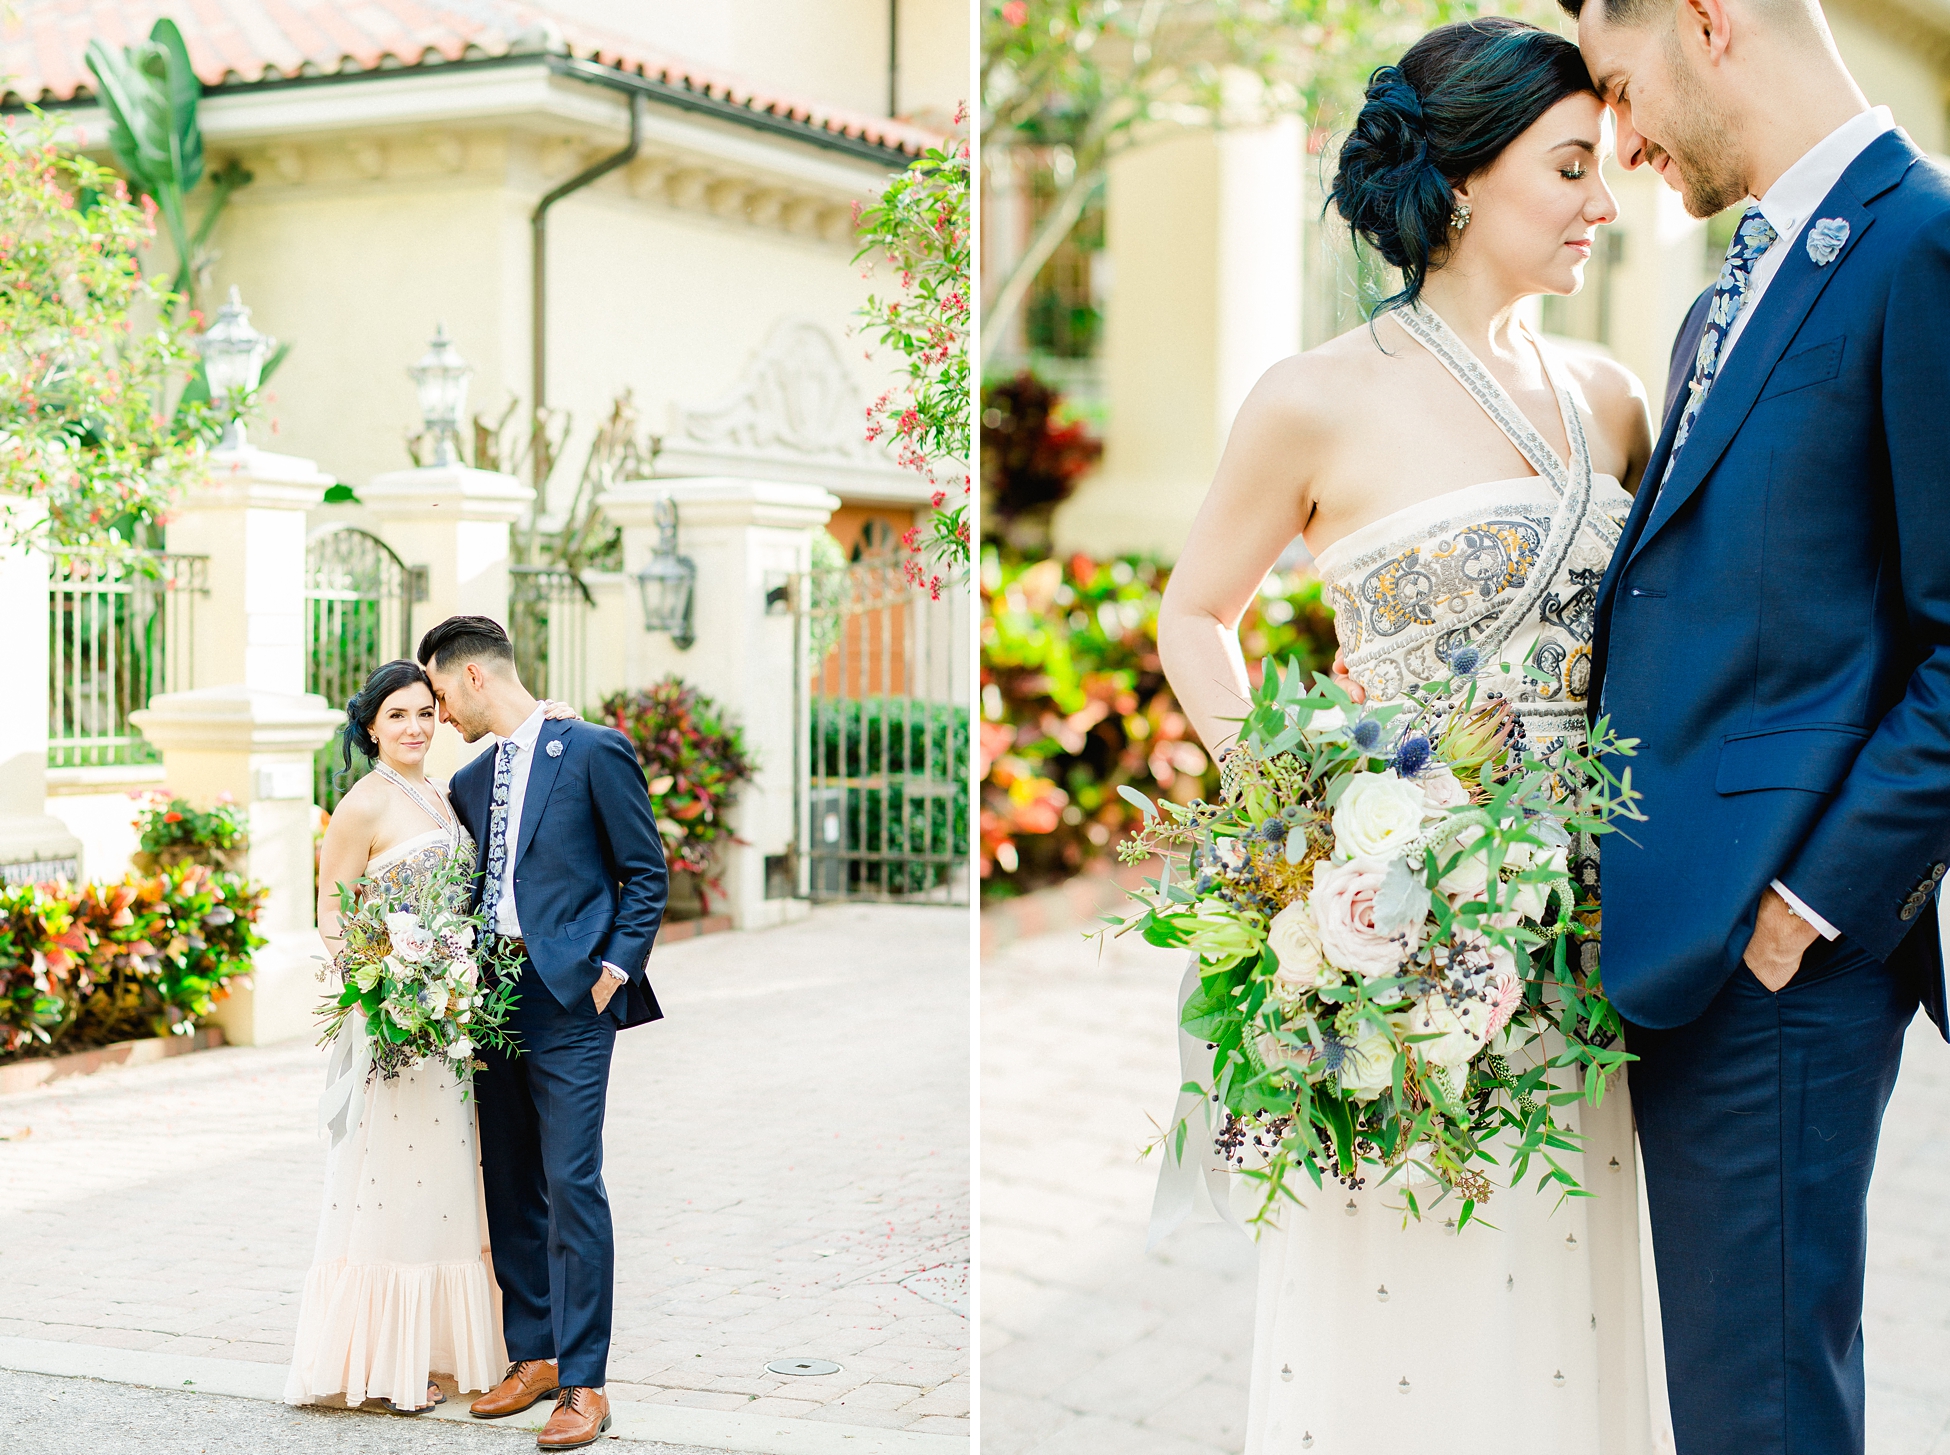 Tampa Anniversary Session | © Ailyn La Torre Photography 2019